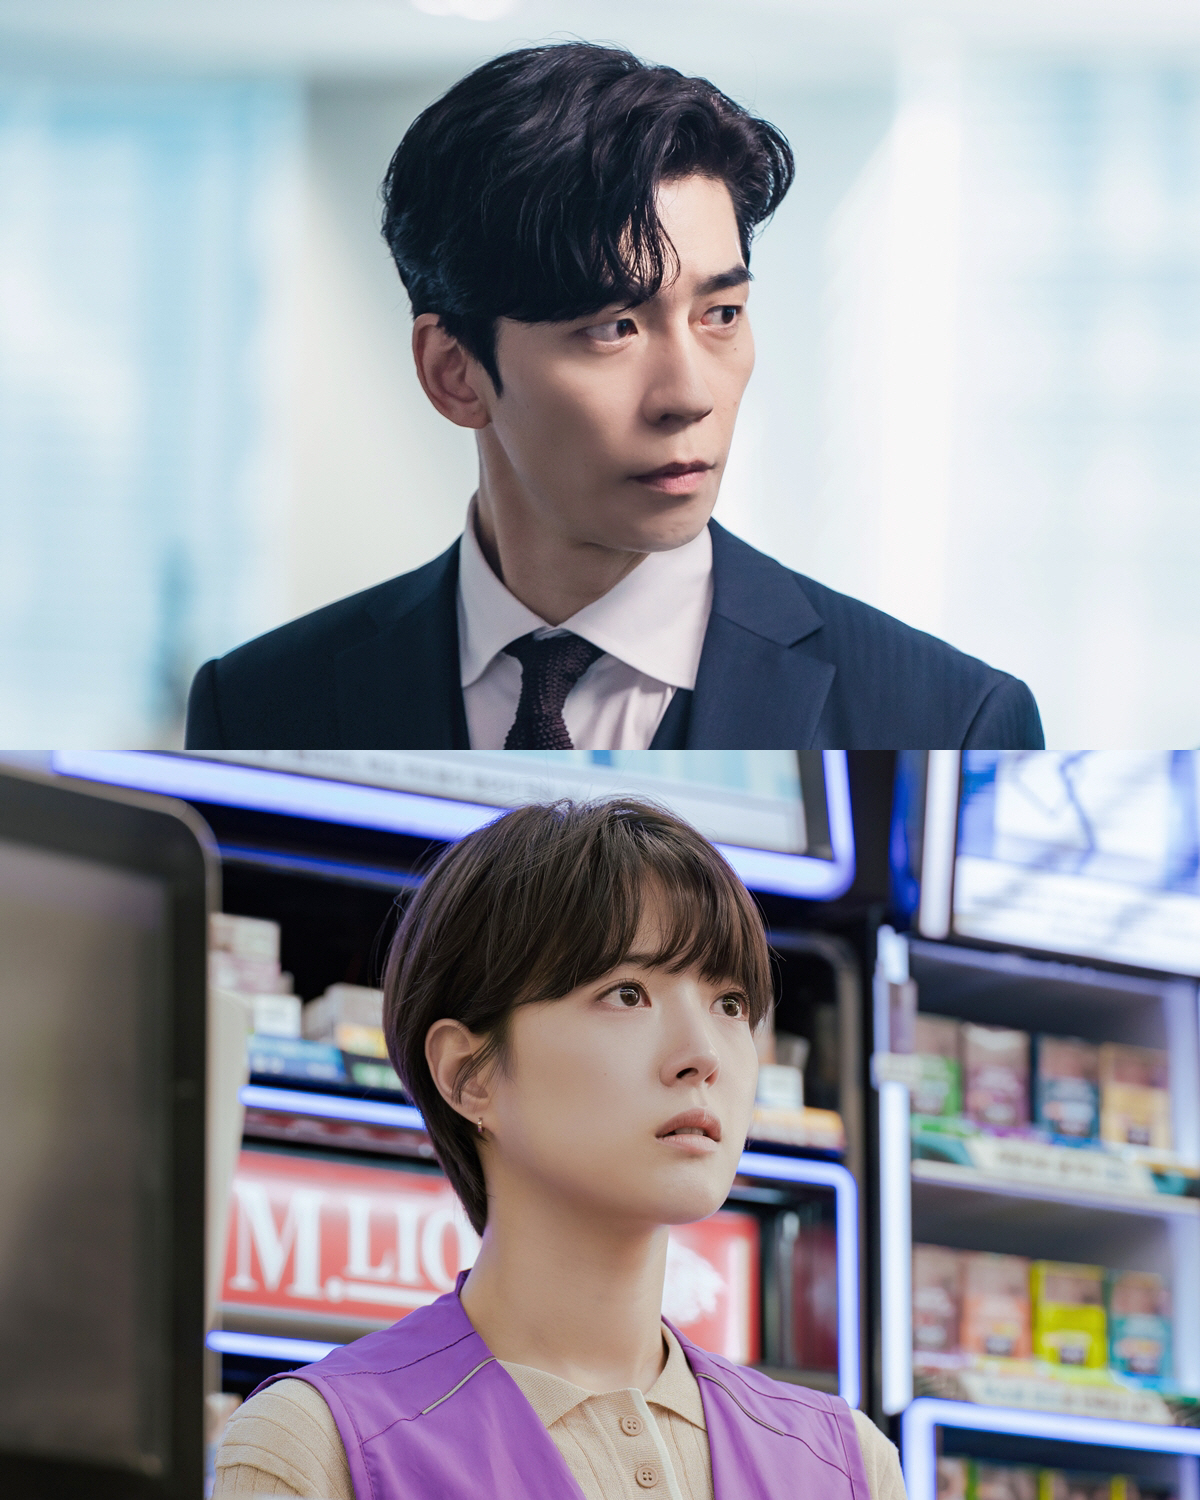 2020 yearMBCs new monthly mini-series Kairos (played by Lee Soo-hyun / directed by Park Seung-woo / produced by Kahaani, Kahaani), which will be broadcast at 9:30 p.m. on Oct. 26, is a man who has to find a missing mother and Kim Seo-jin (Shin Sung-rok), a month after his young daughter was kidnapped and despaired. Its a time The Crossing thriller where a woman from the month before, Han A-ri (Lee Se-young), struggles cross time to save her loved one.Shin Sung-rok and Lee Se-young play Kim Seo-jin and Han Ae-ri, respectively, and match the acting co-work connecting the past and Future.Kim Seo-jin (Shin Sung-rok) is the youngest person to be jealous of other board members, and is a perfectionist tendency to judge only by situation and number.He is curious about how he will correct the fate of his daughters kidnapping without an empty gap.In addition, Lee Se-young is a job-seeker who goes to three jobs and study in parallel because she is paying for surgery of her mother Kwak Song-ja (Hwang Jung-min) in a tight living.He is a person with a warm heart, such as paying for his grandmothers treatment of his friend Lim Gun-wook (Kang Seung-yoon) in lieu of his lack of living.I wonder if Han Ae-ri will find her mother, who is living without losing hope in a bad situation, and her mothers disappearance, which happened like a blue sky wall.As such, Shin Sung-rok and Lee Se-young are set to ignite an exciting Kahaani that defies time for loved ones.An unpredictable development is stimulating the shooter, whether the two men and women in the past and Future can save each other from nightmare reality every month.Shin Sung-rok, Lee Se-youngs Time The Crossing chemistry will be available for 2020 yearYou can meet at MBCs new monthly mini series Kairos, which will be broadcast on October 26 (Mon).